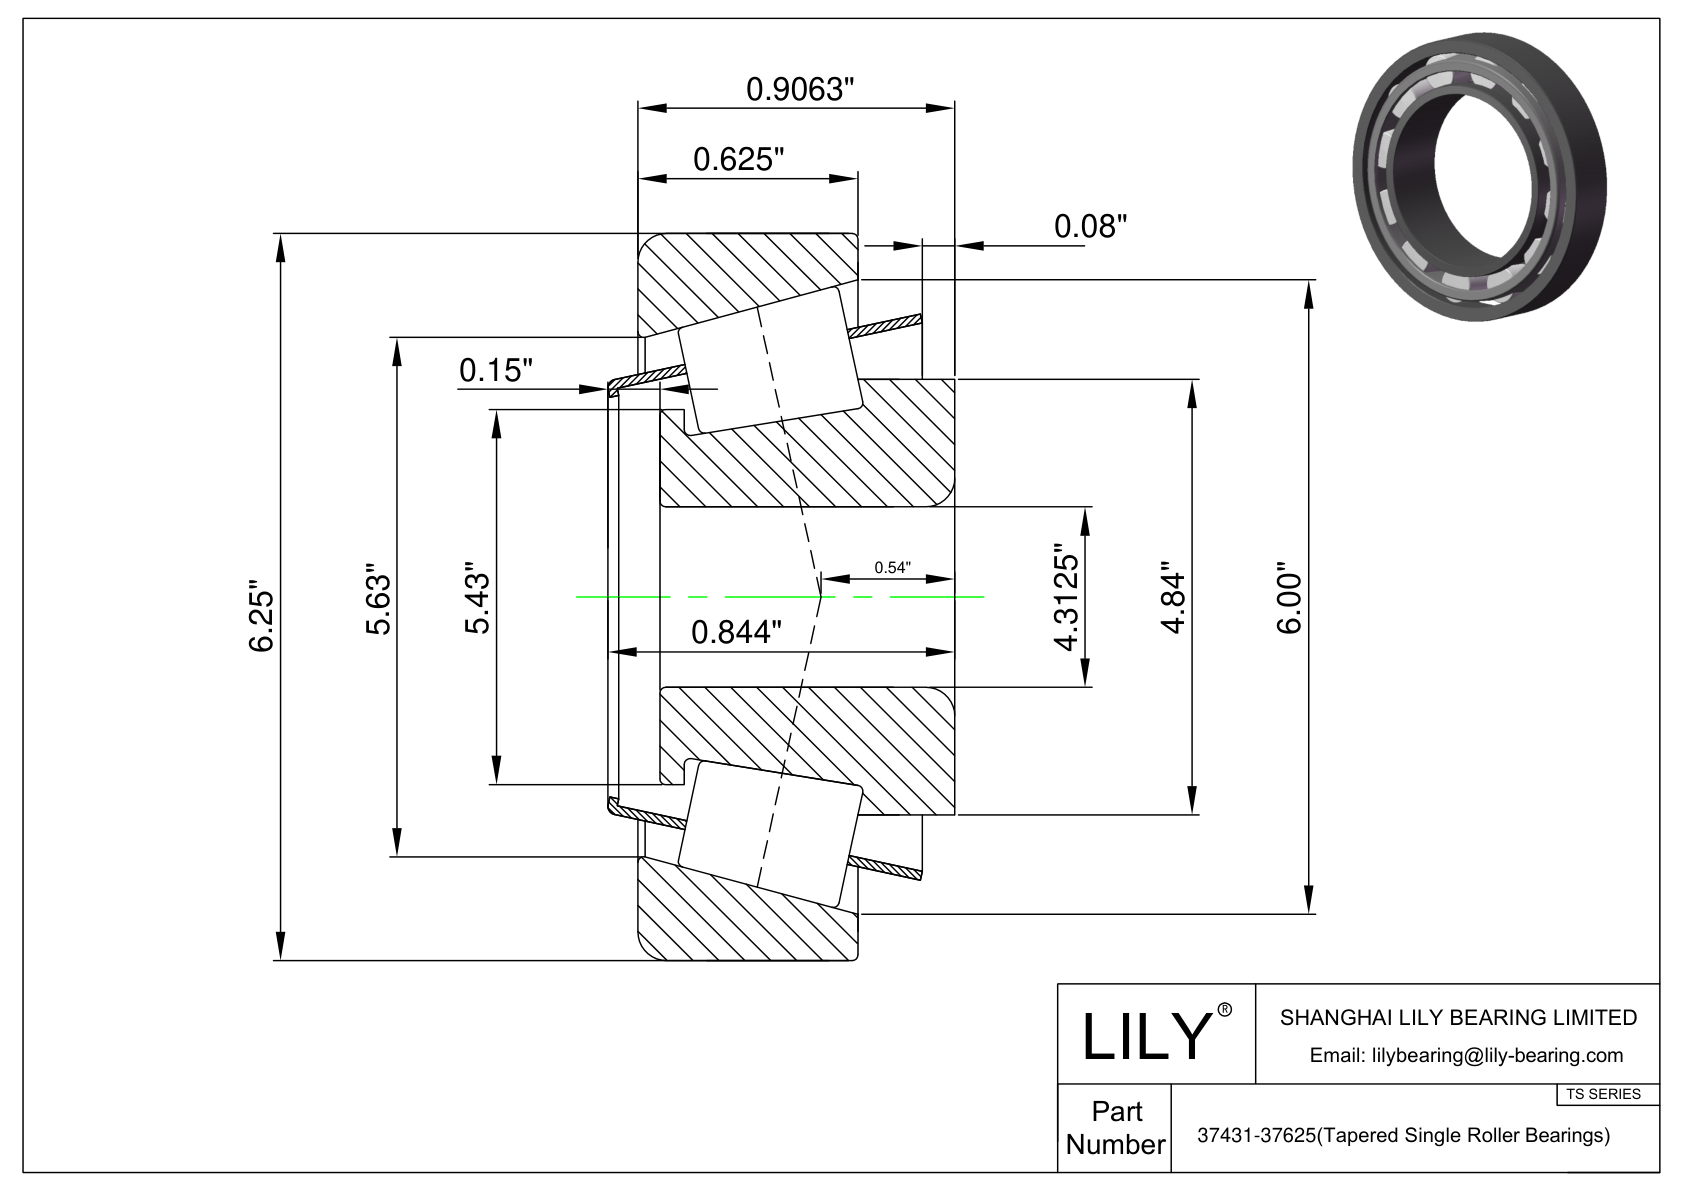 37431-37625 TS (Tapered Single Roller Bearings) (Imperial) cad drawing